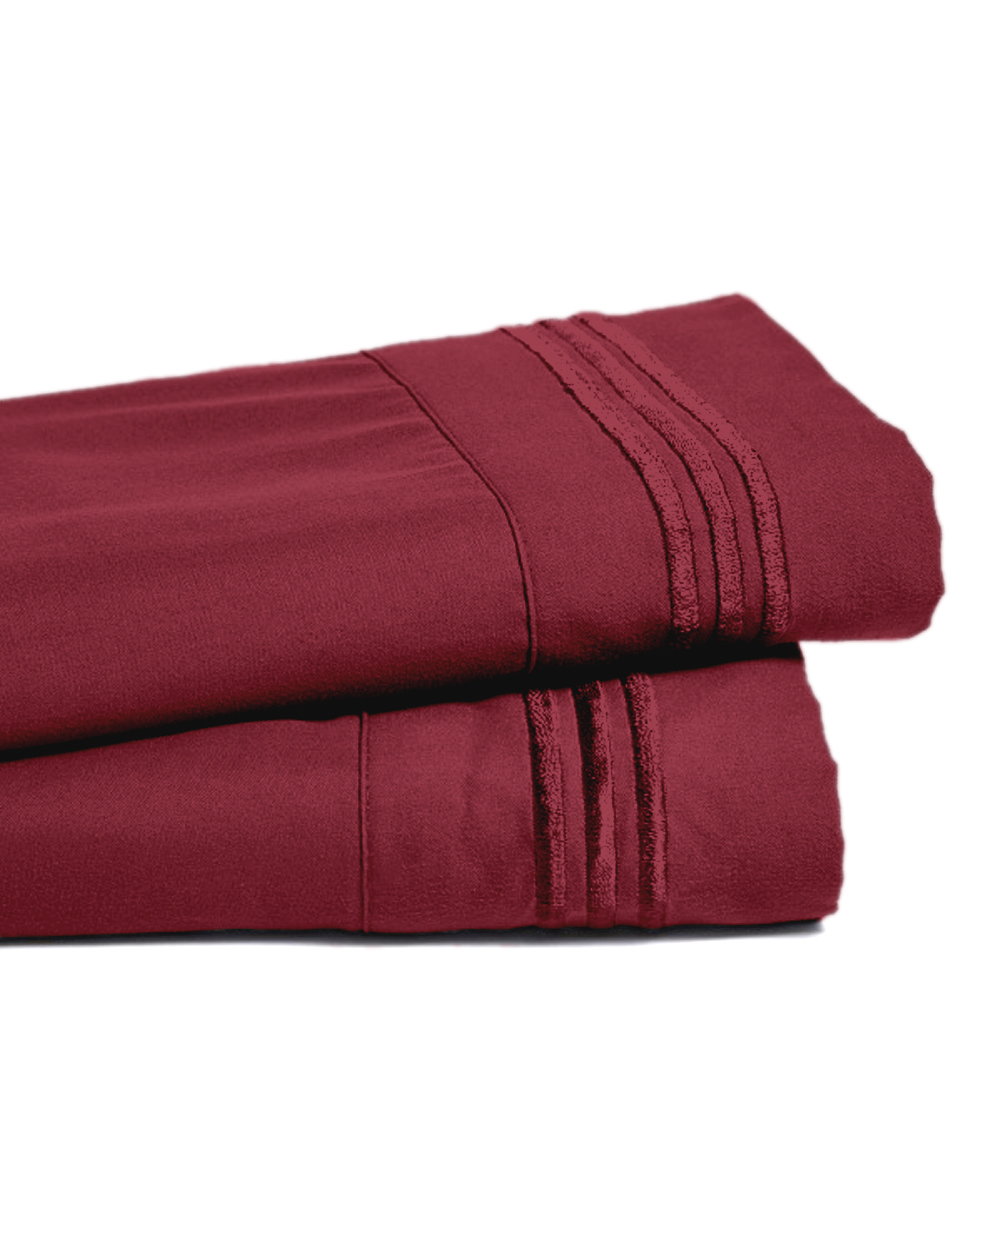 Deep Pocket Bamboo Bed Sheet - Luxury 2200 Embroidered Wrinkle, Fade and Stain Resistant Sheets - Burgundy Full Size